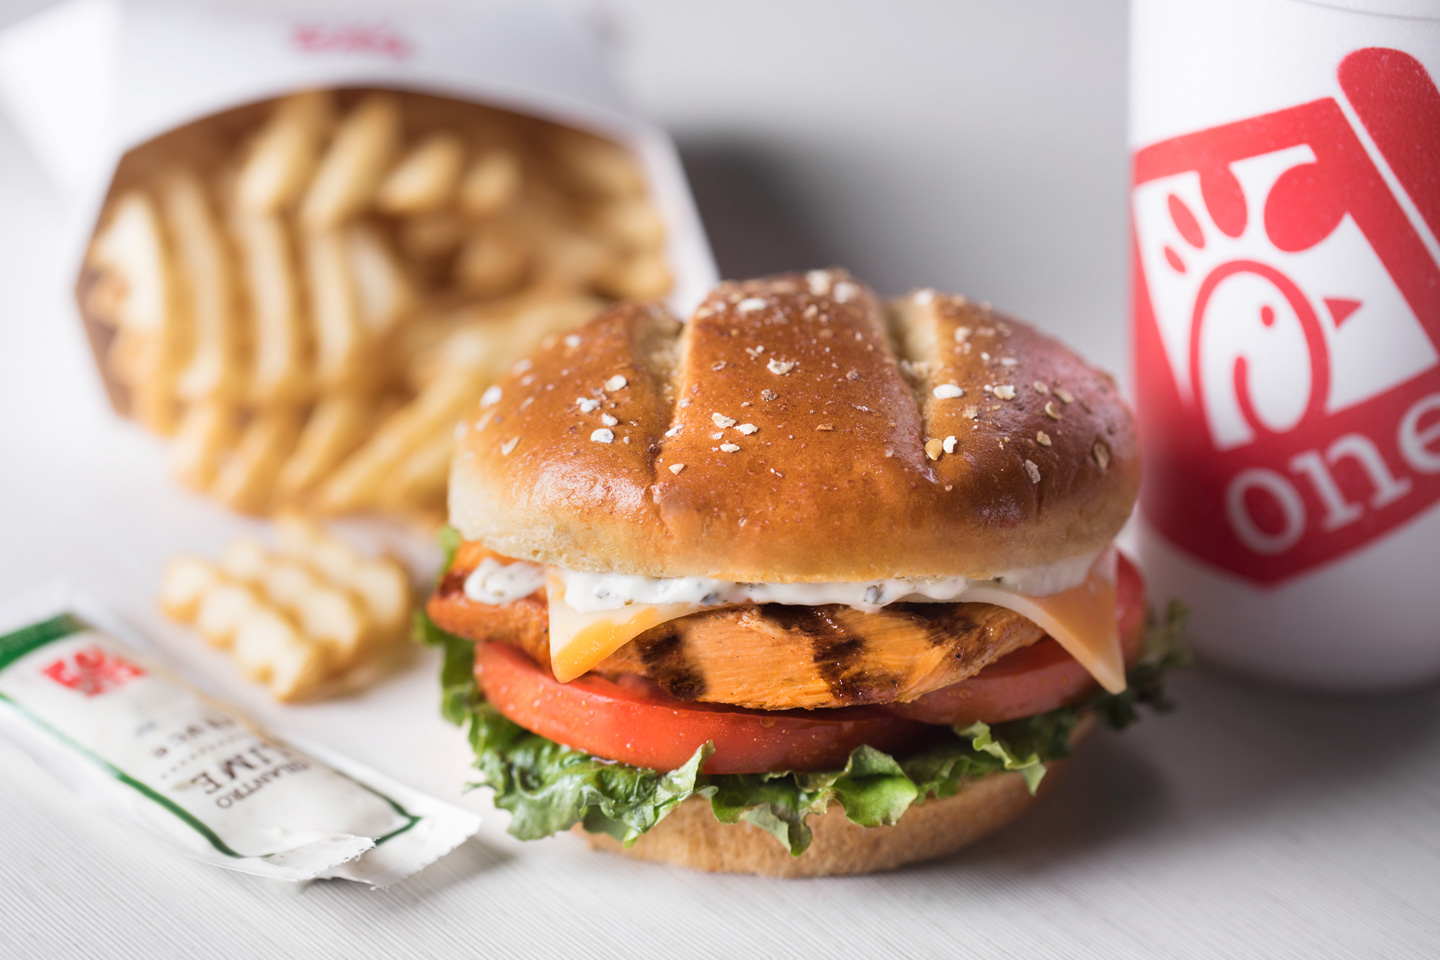 Chick-fil-A Has New Spicy Chicken Sandwich, McDonald’s Brings Back Spicy McNuggets